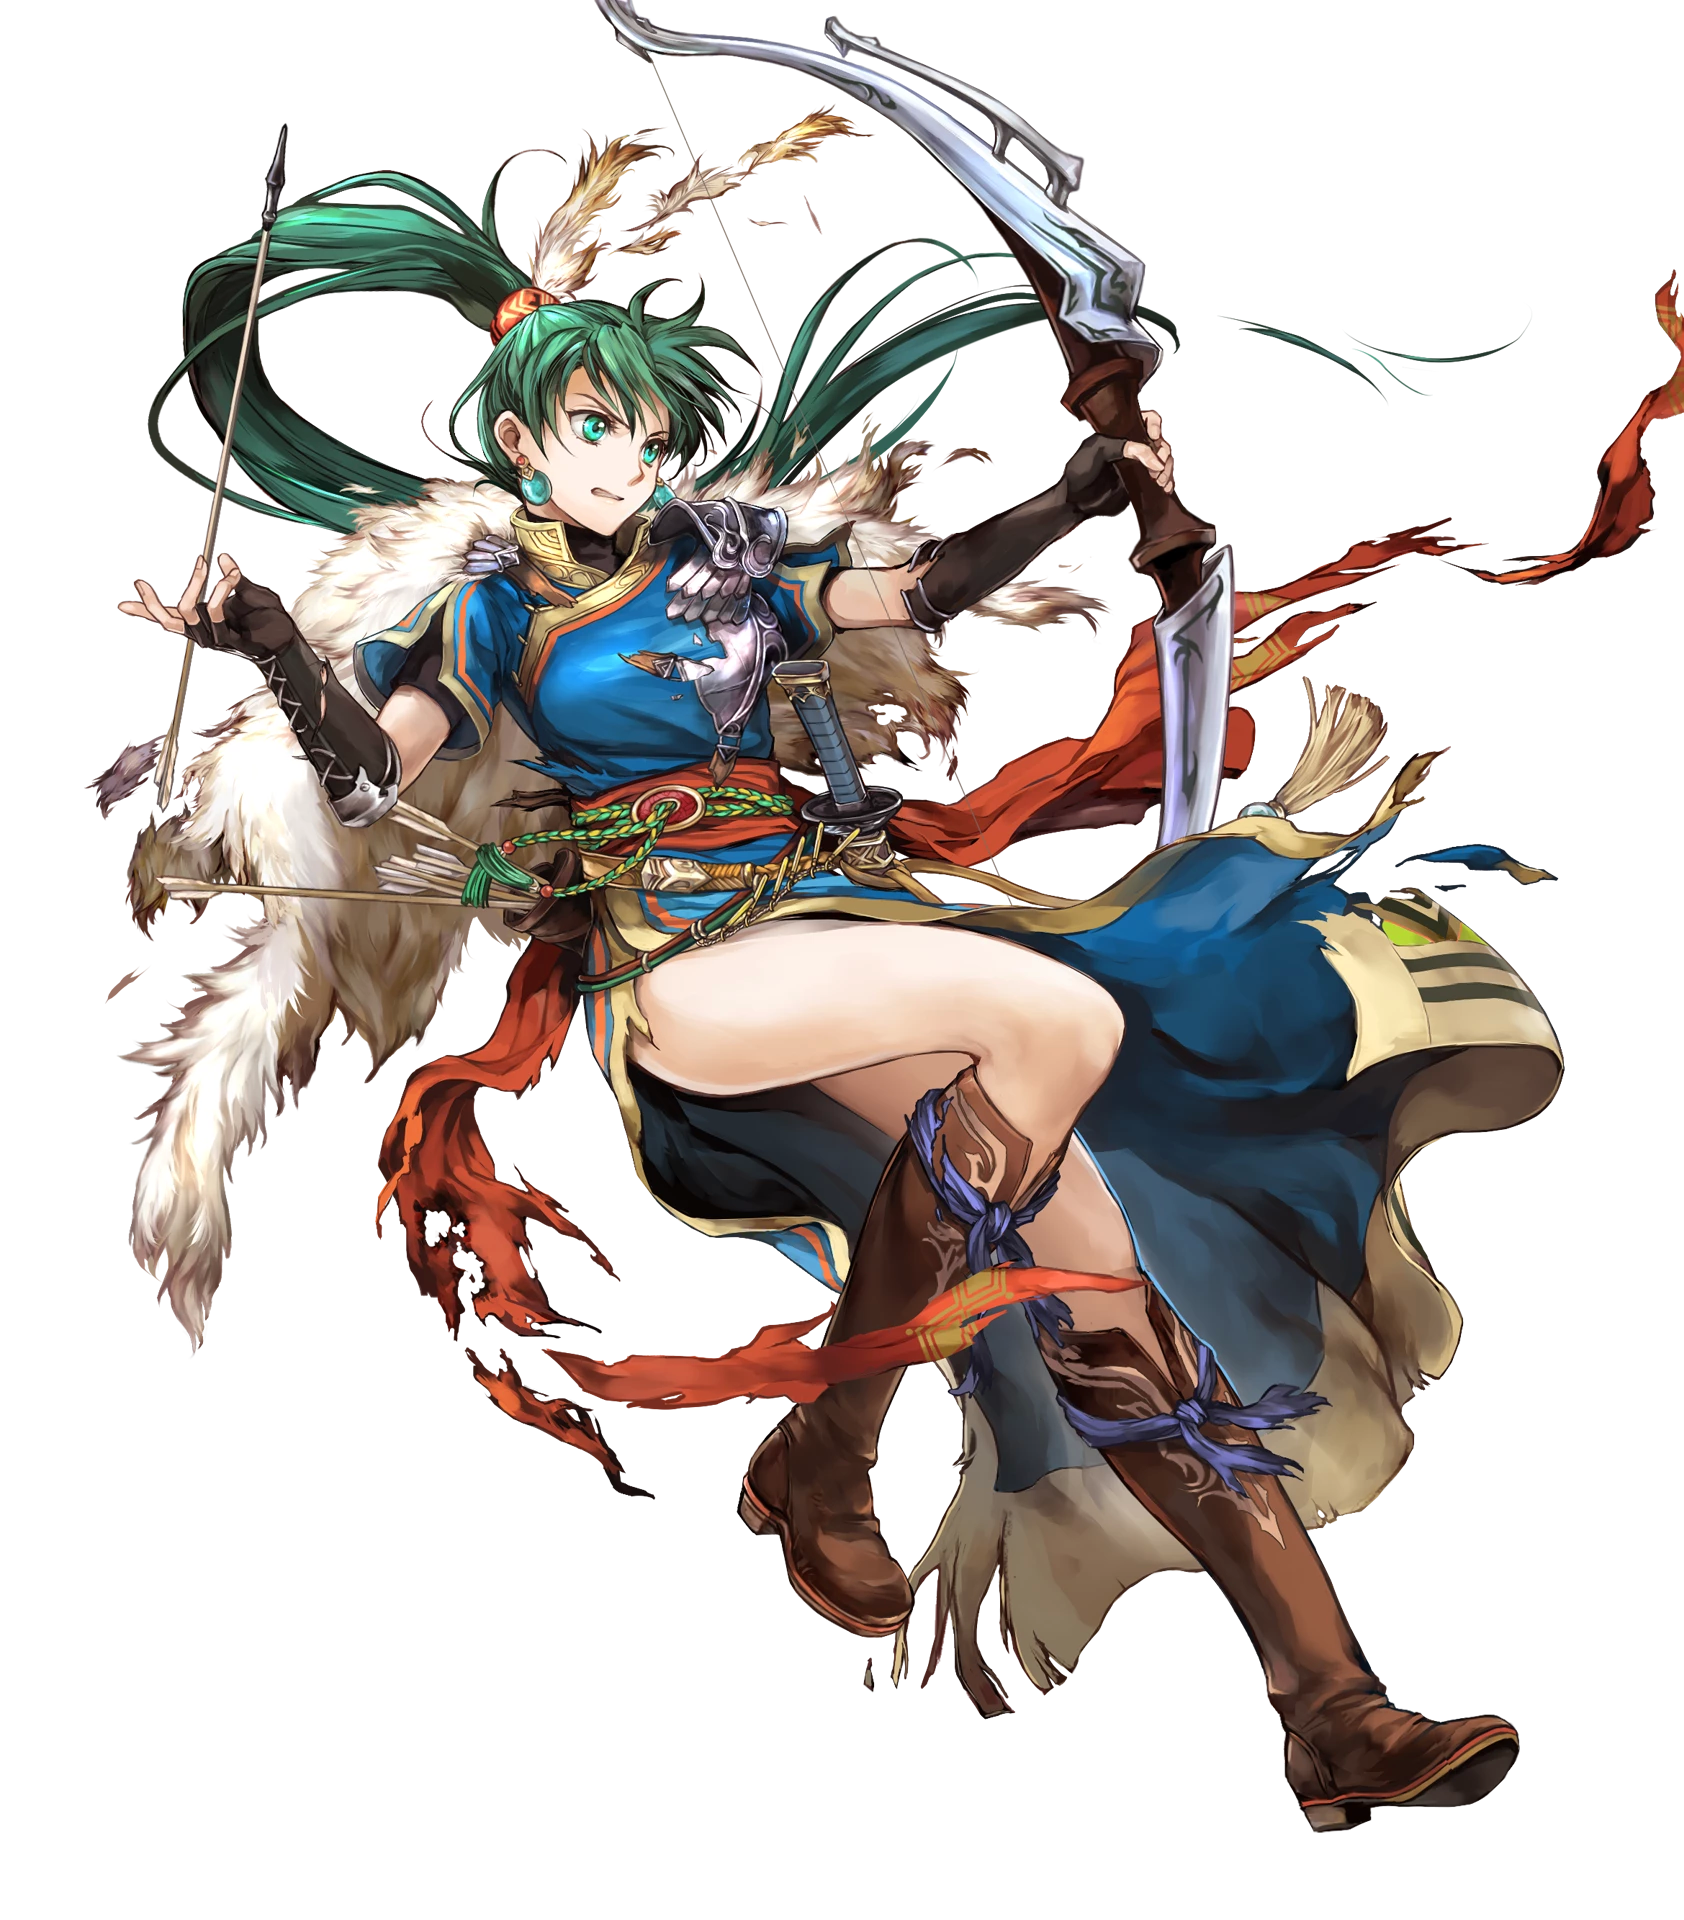 Lyn: Lady of the Wind by Wada Sachiko